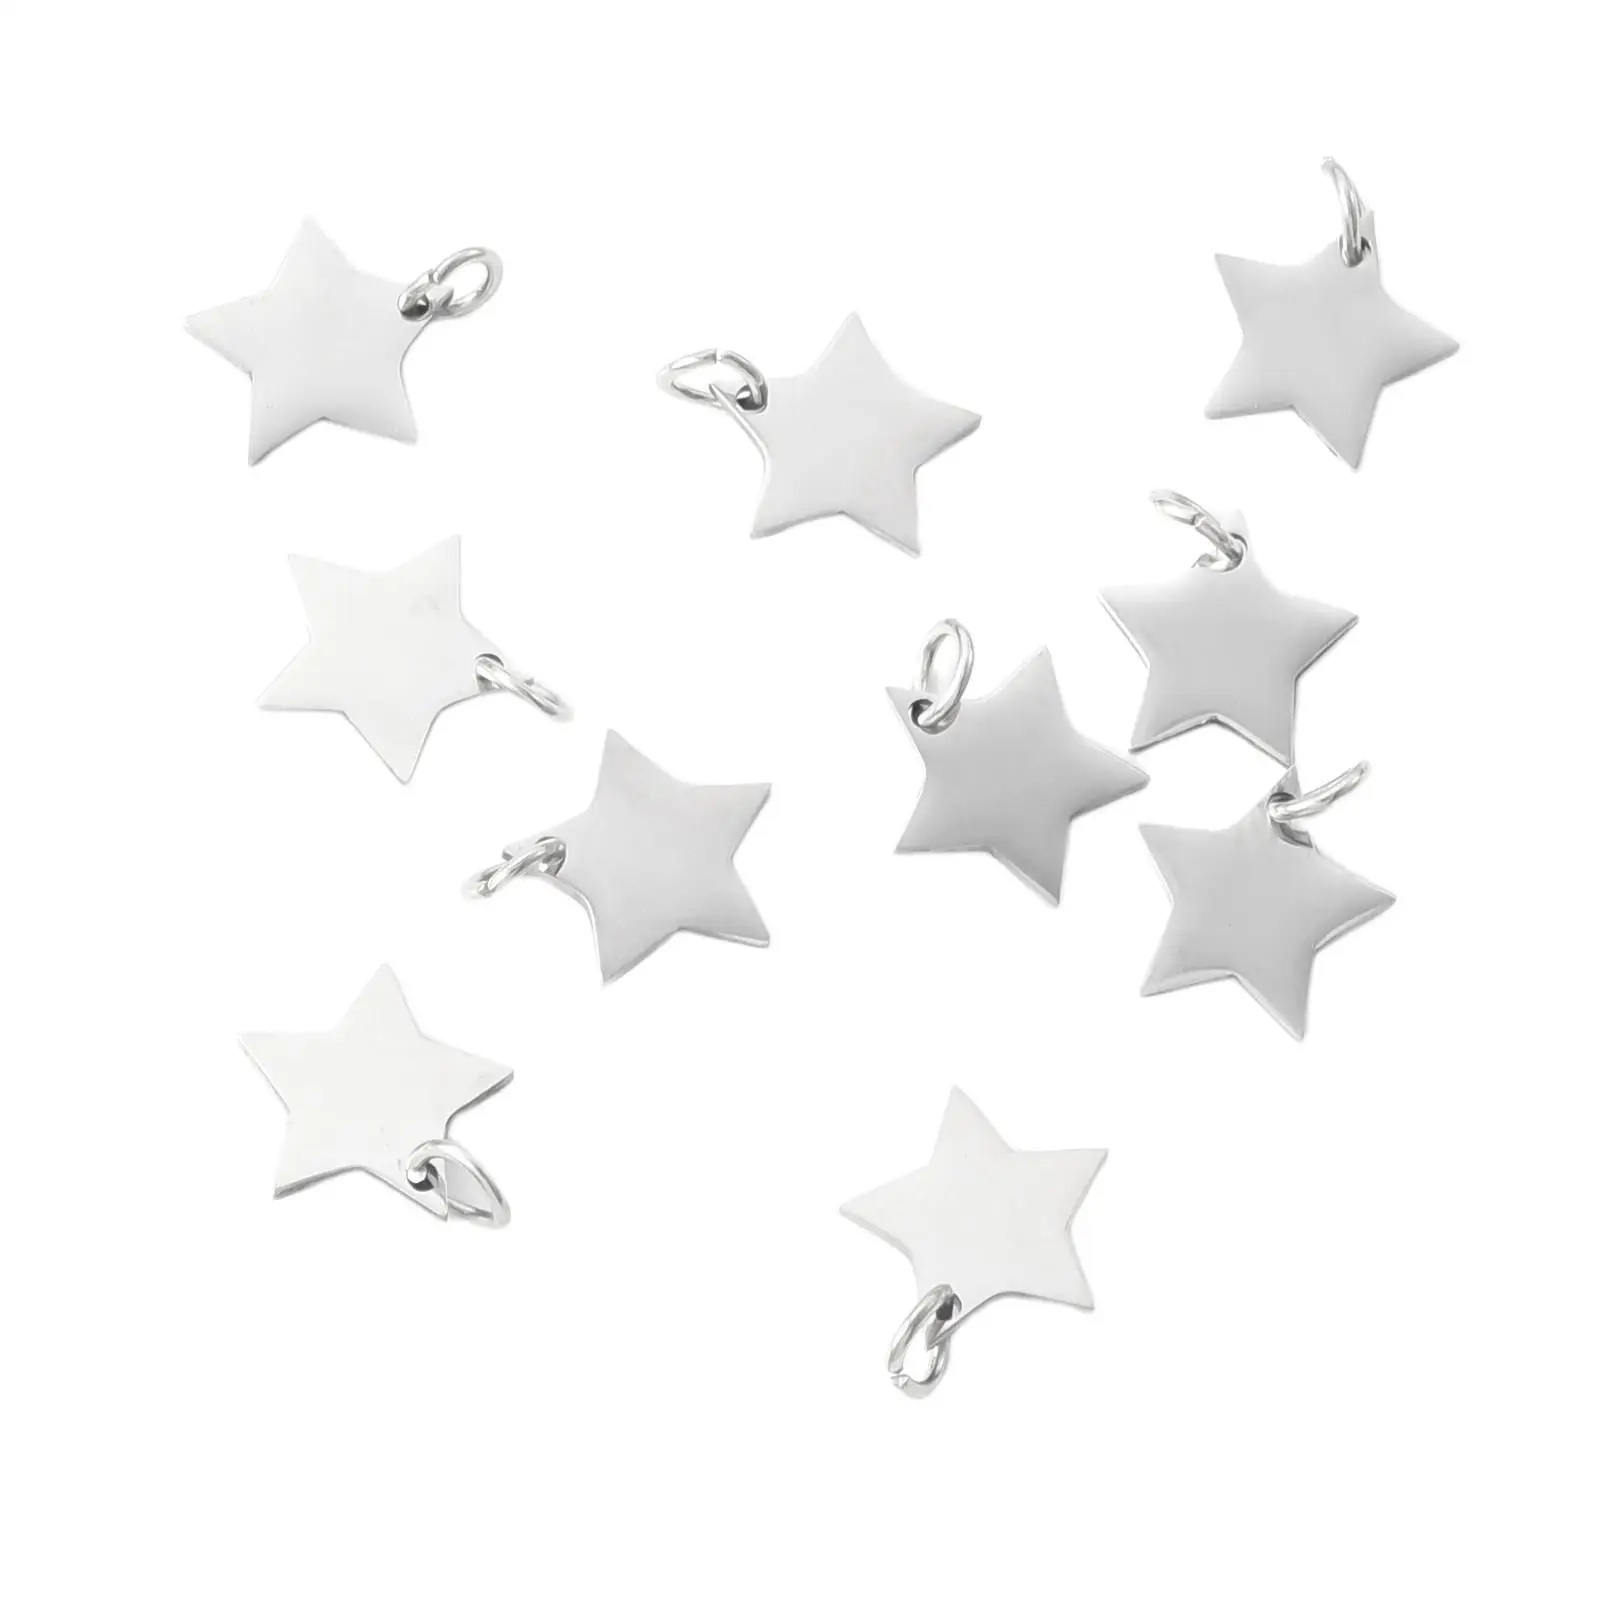 10pcs  Shape Pendant Charms Jewelry Necklace Making Findings Craft